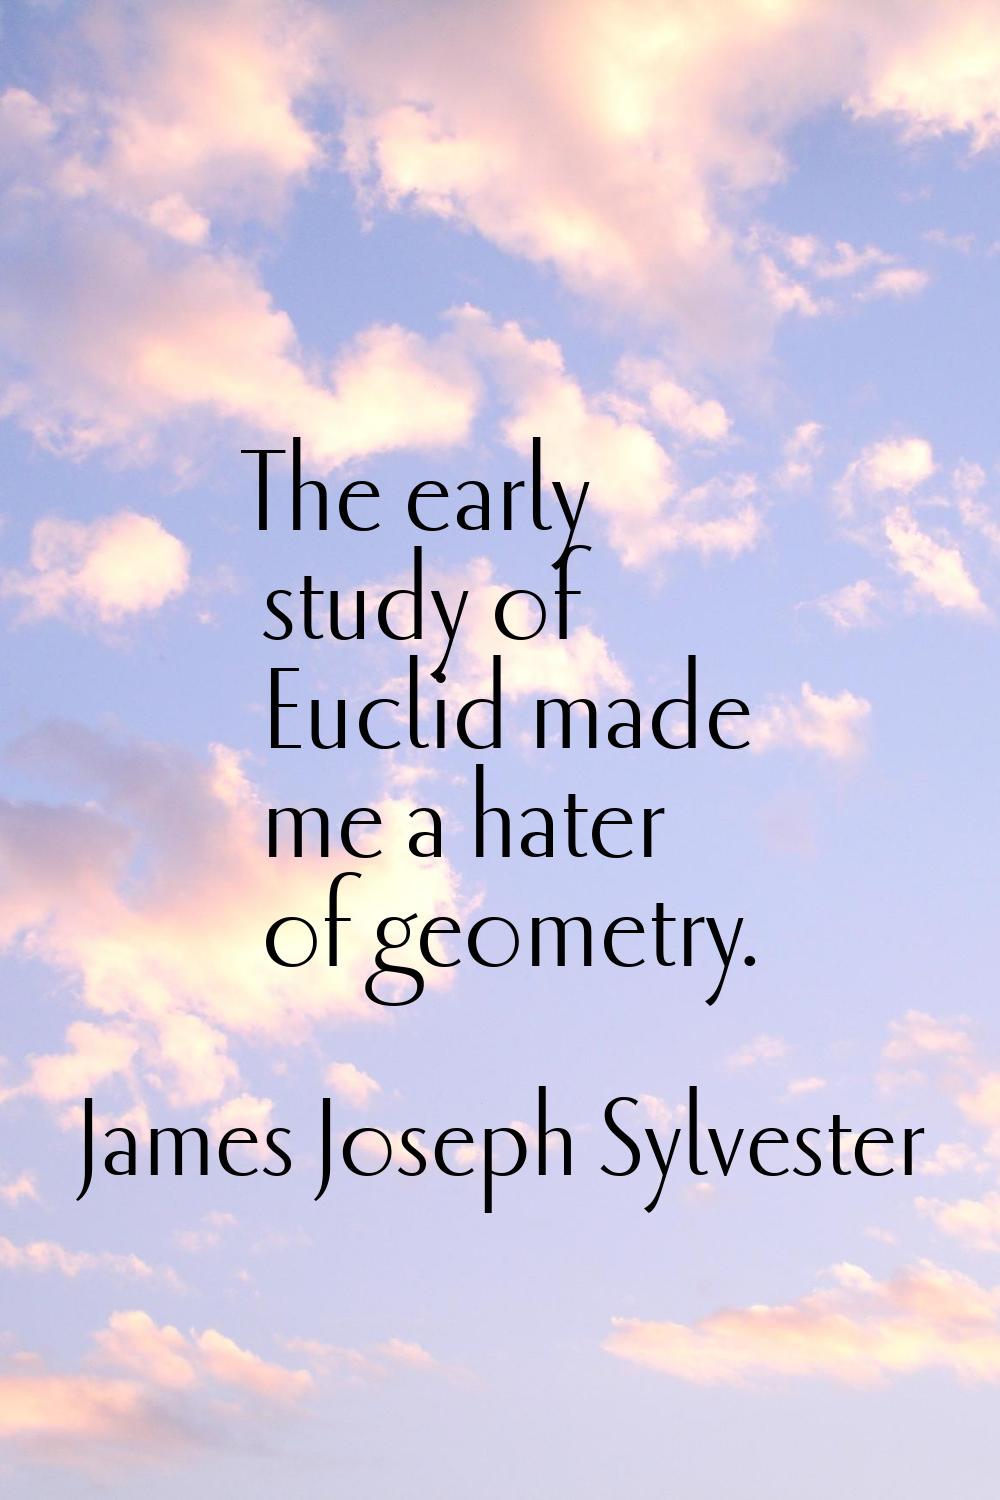 The early study of Euclid made me a hater of geometry.